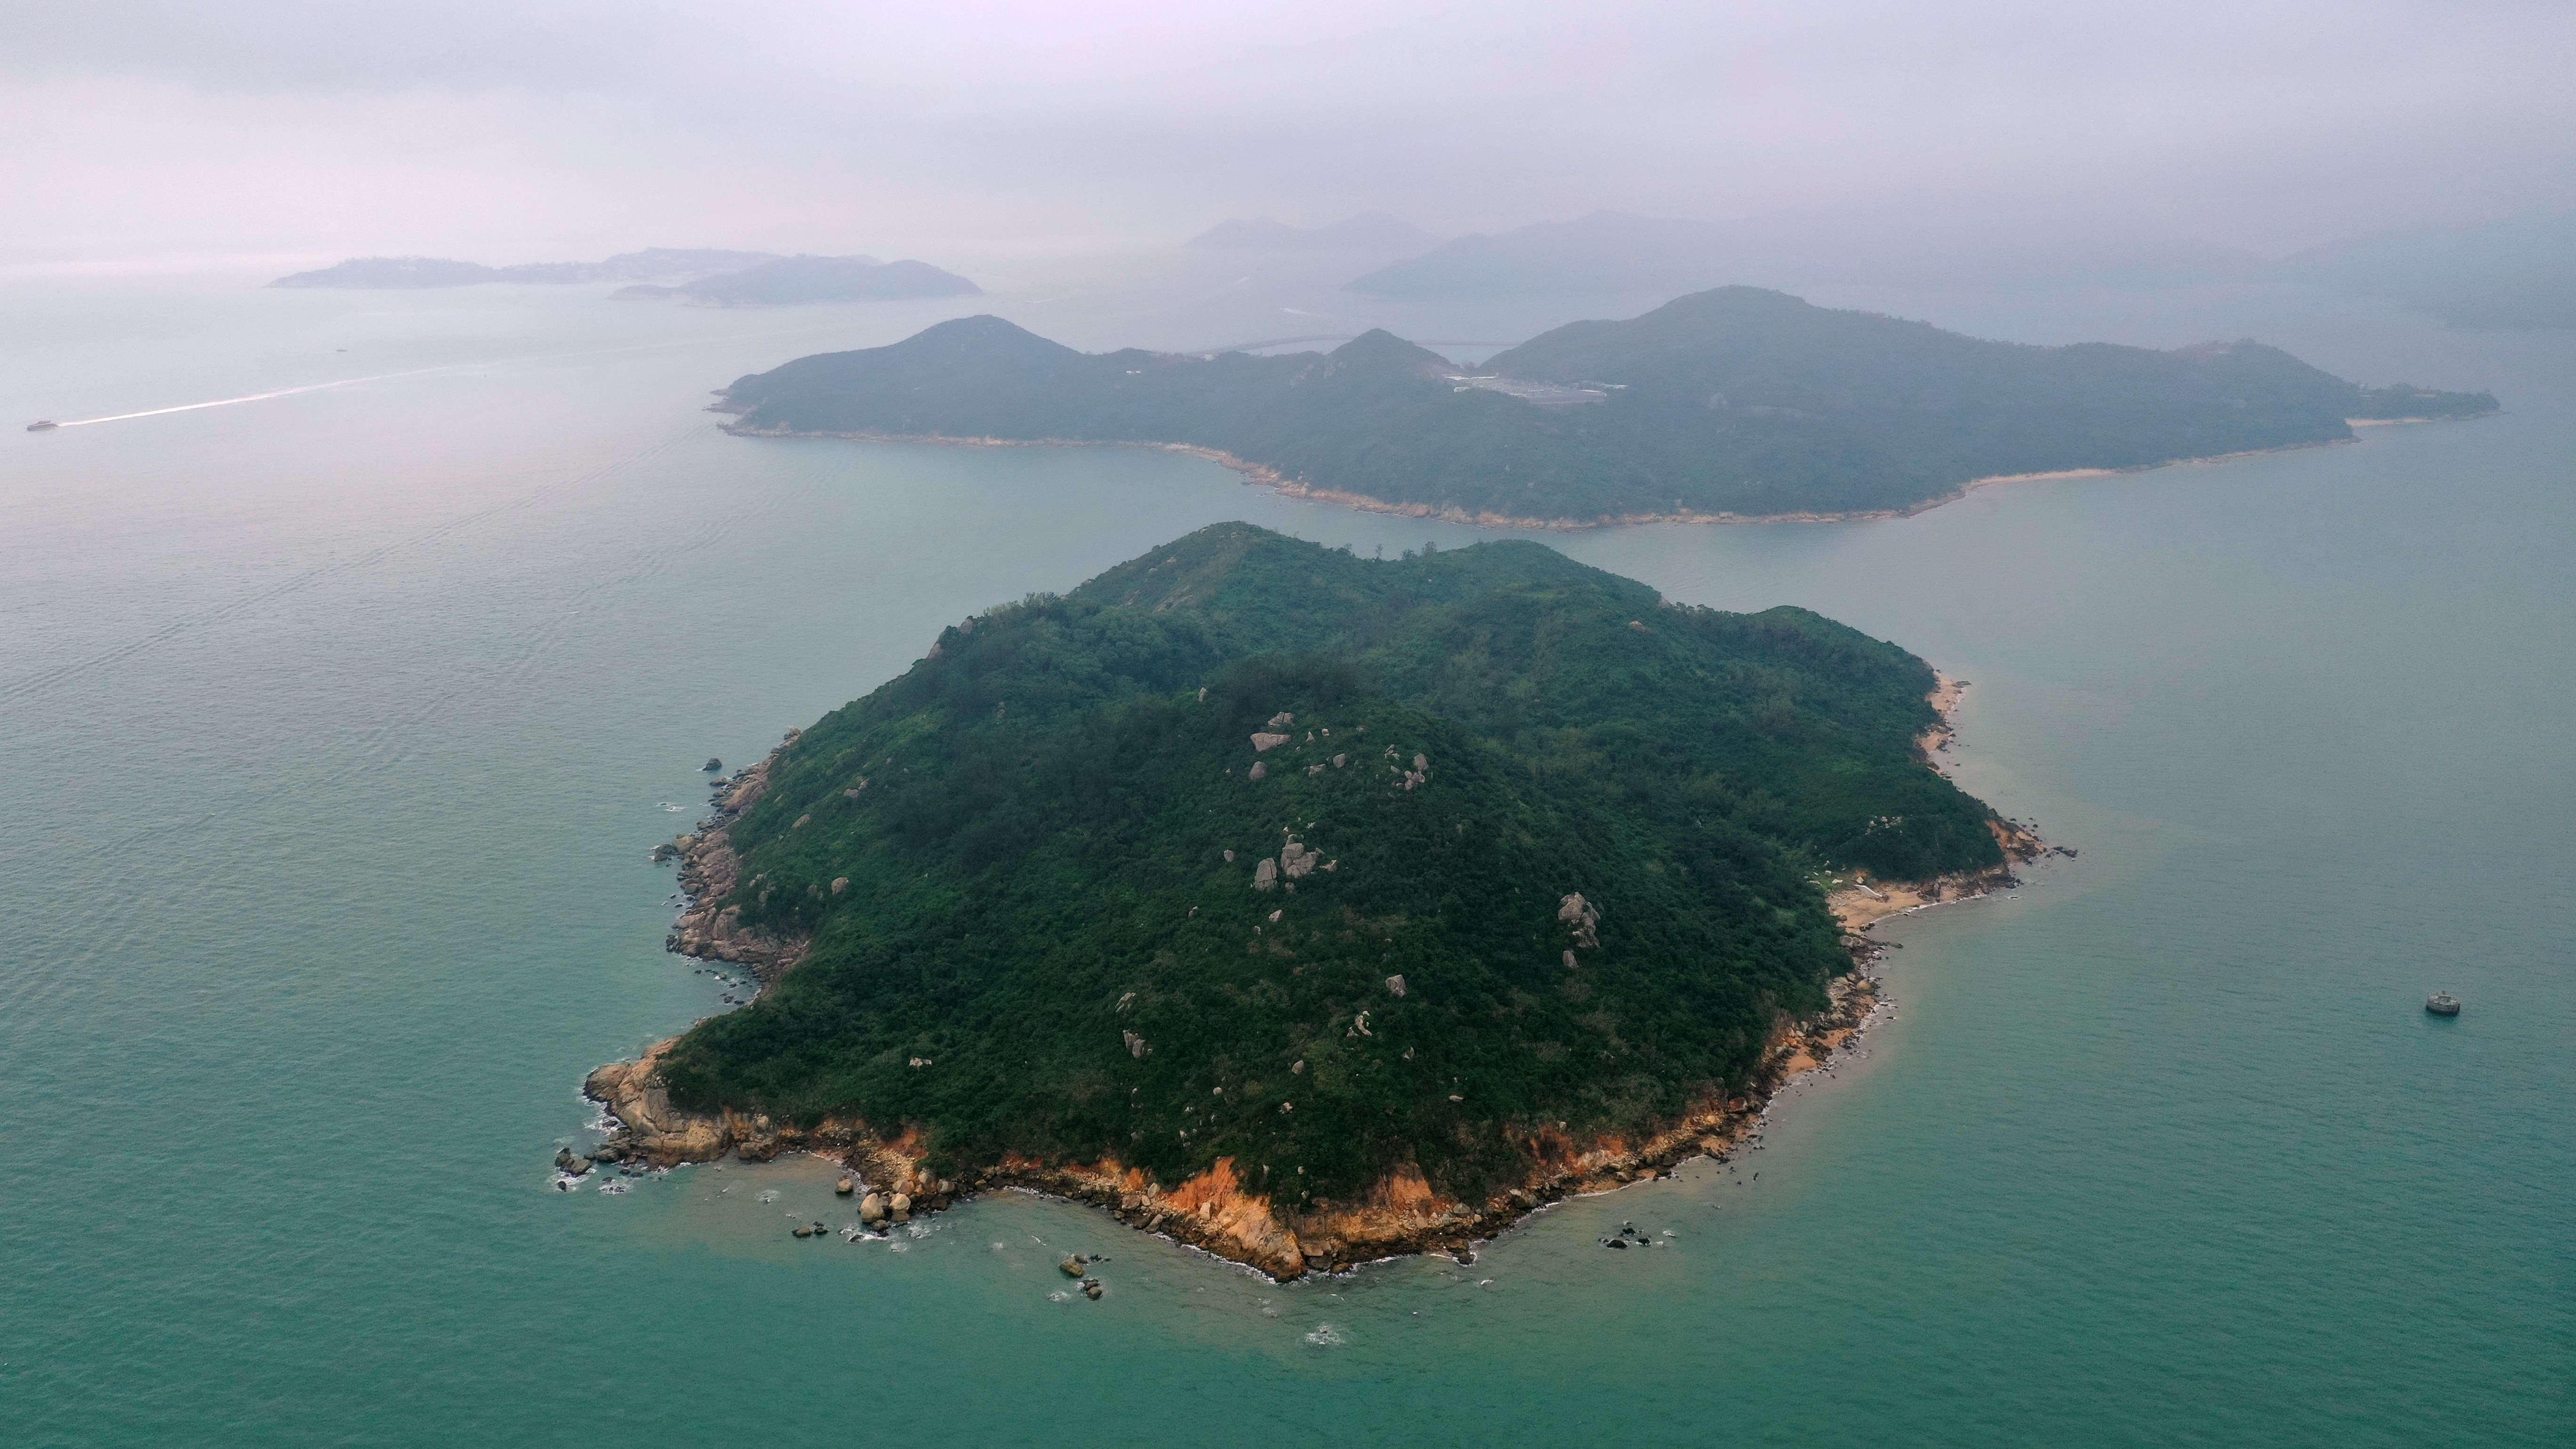 Sunshine Island, in the waters east of Lantau, will be surrounded by reclaimed land if the Lantau Tomorrow Vision project goes ahead. Photo: Winson Wong